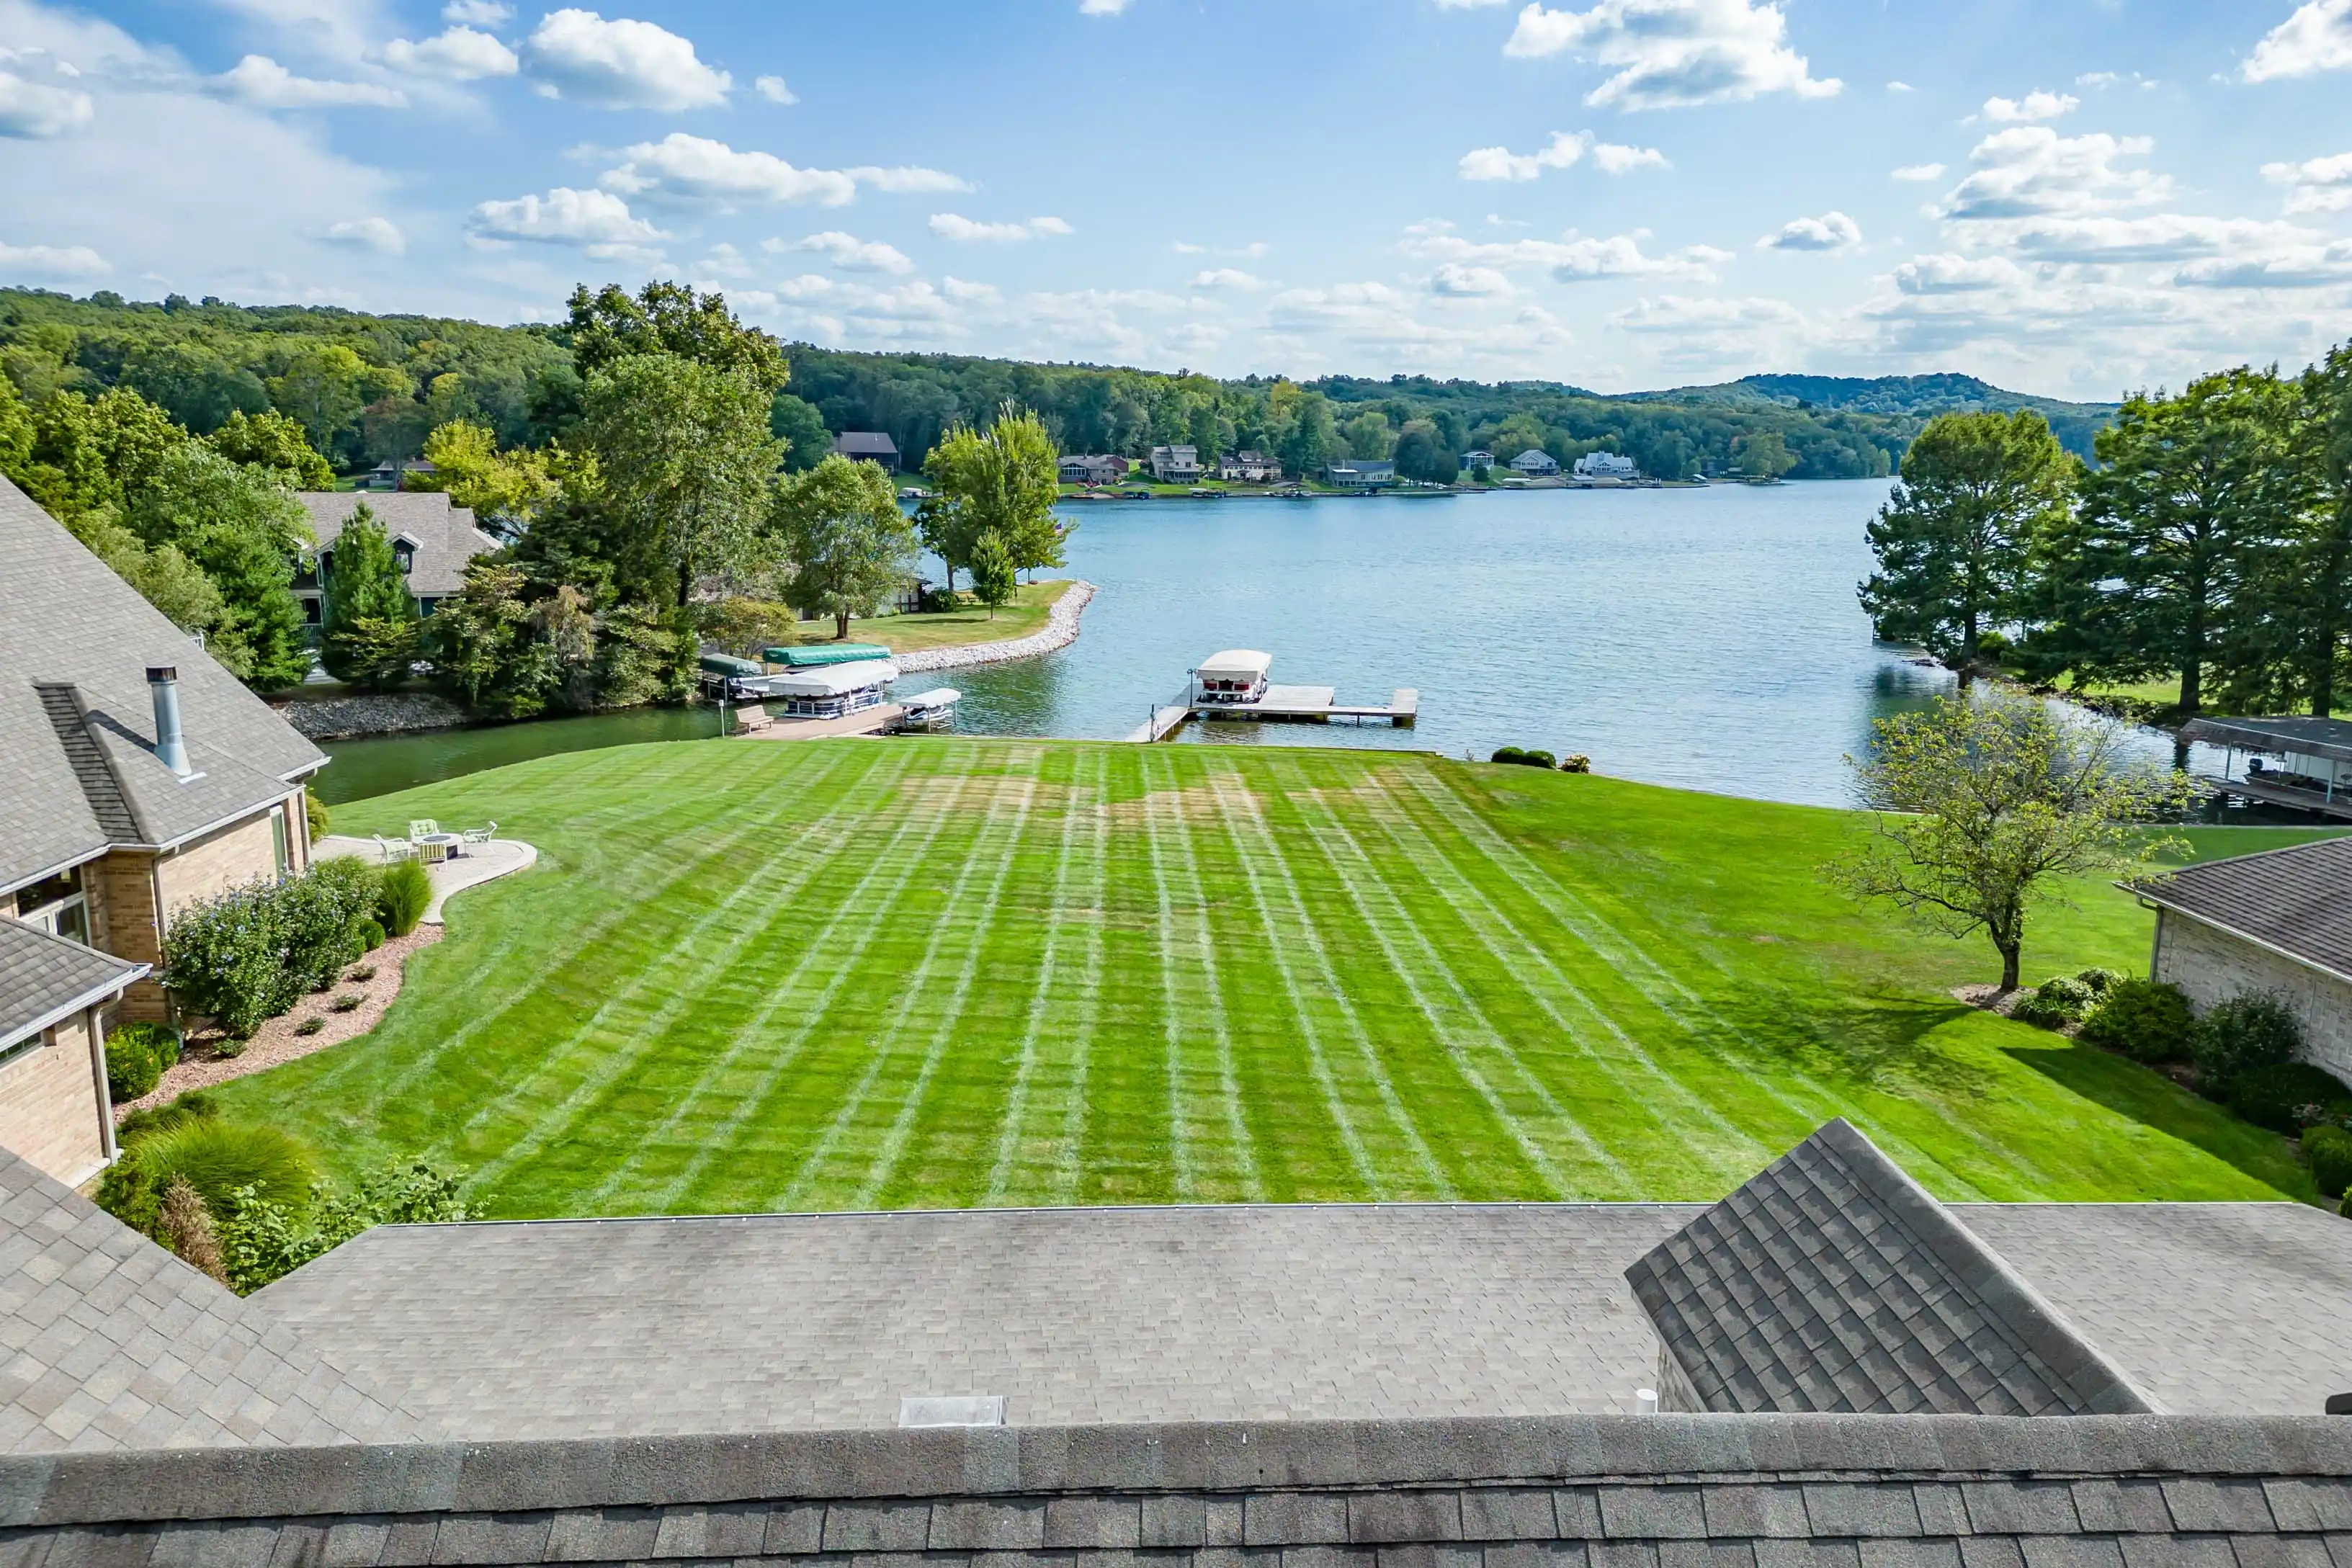 Aerial view of a well-manicured lawn leading to a lake with docks and boats, surrounded by residential homes and trees under a partly cloudy sky.